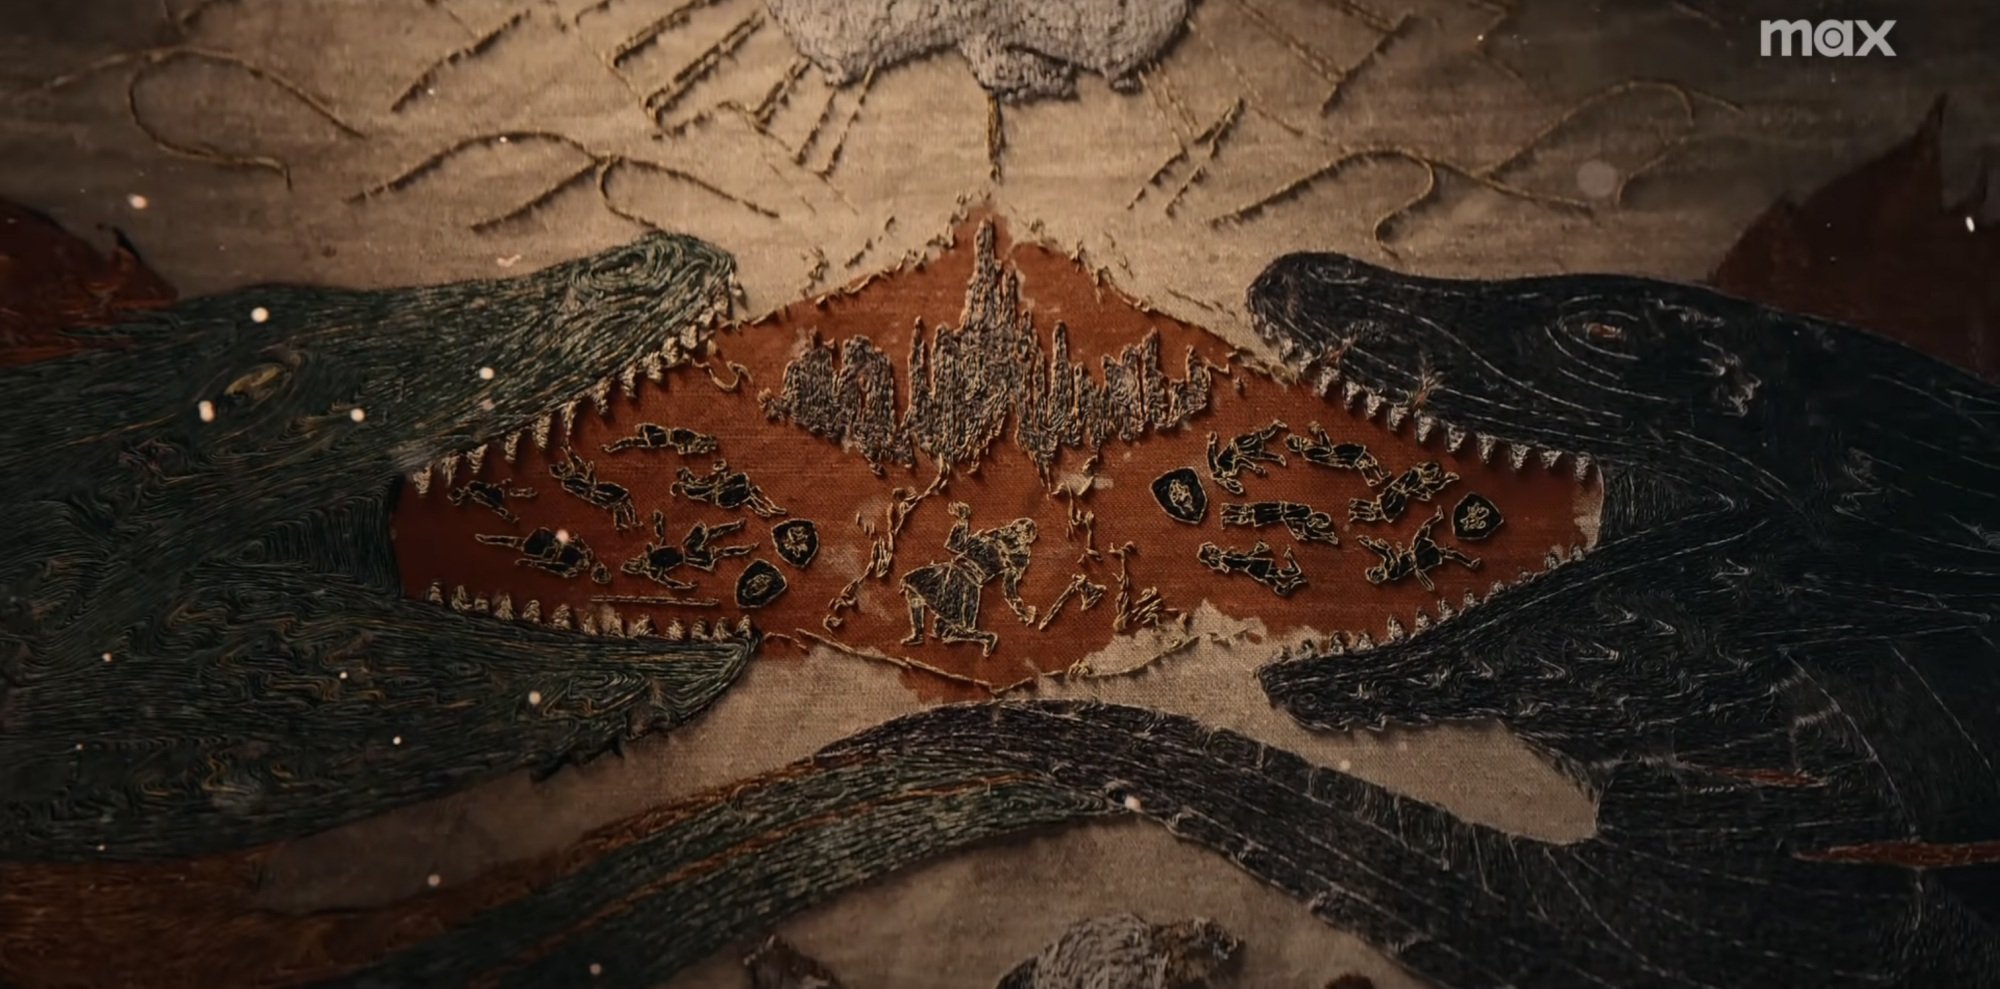 A tapestry of two large dragons breathing fire over a field of dying soldiers and the castle of Harrenhal.